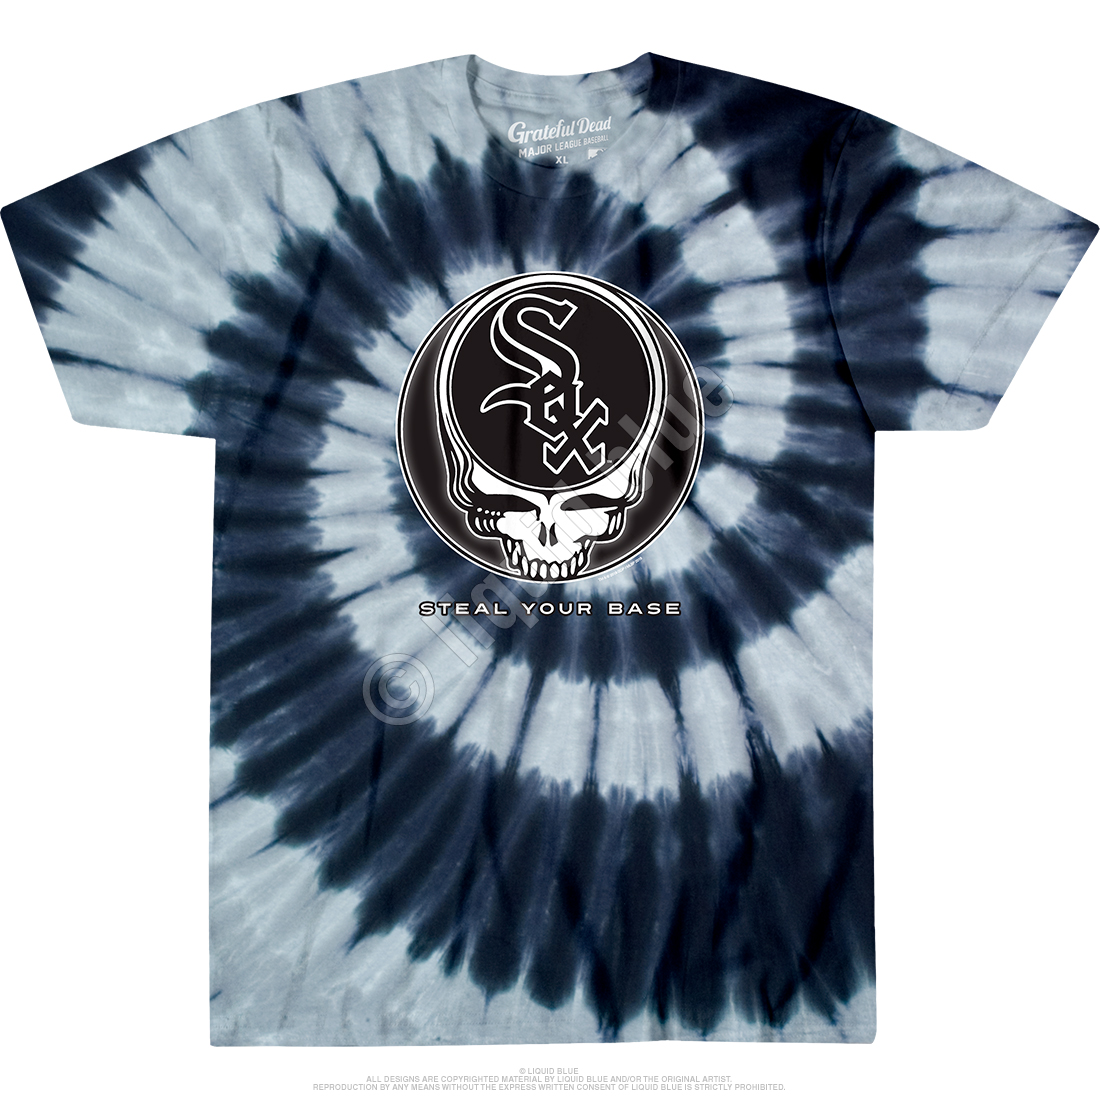 Join us for Grateful Dead Night on - Chicago White Sox